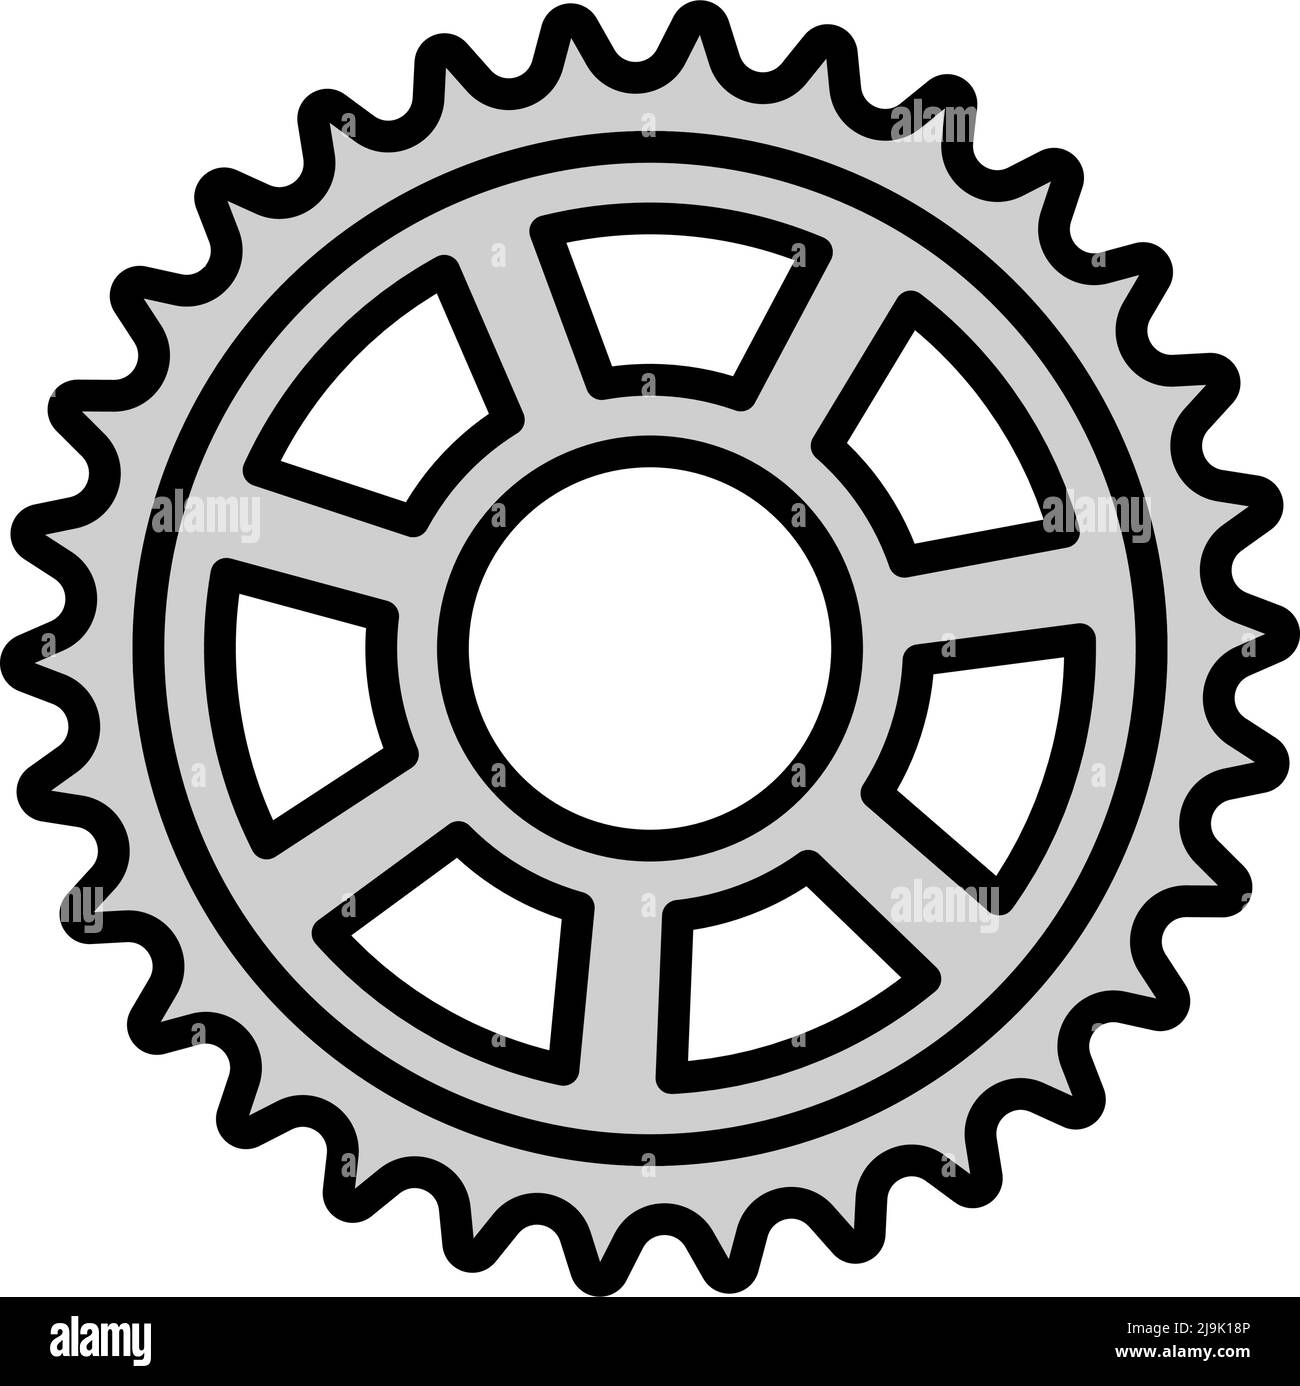 Bike Gear Star Icon. Editable Bold Outline With Color Fill Design. Vector Illustration. Stock Vector